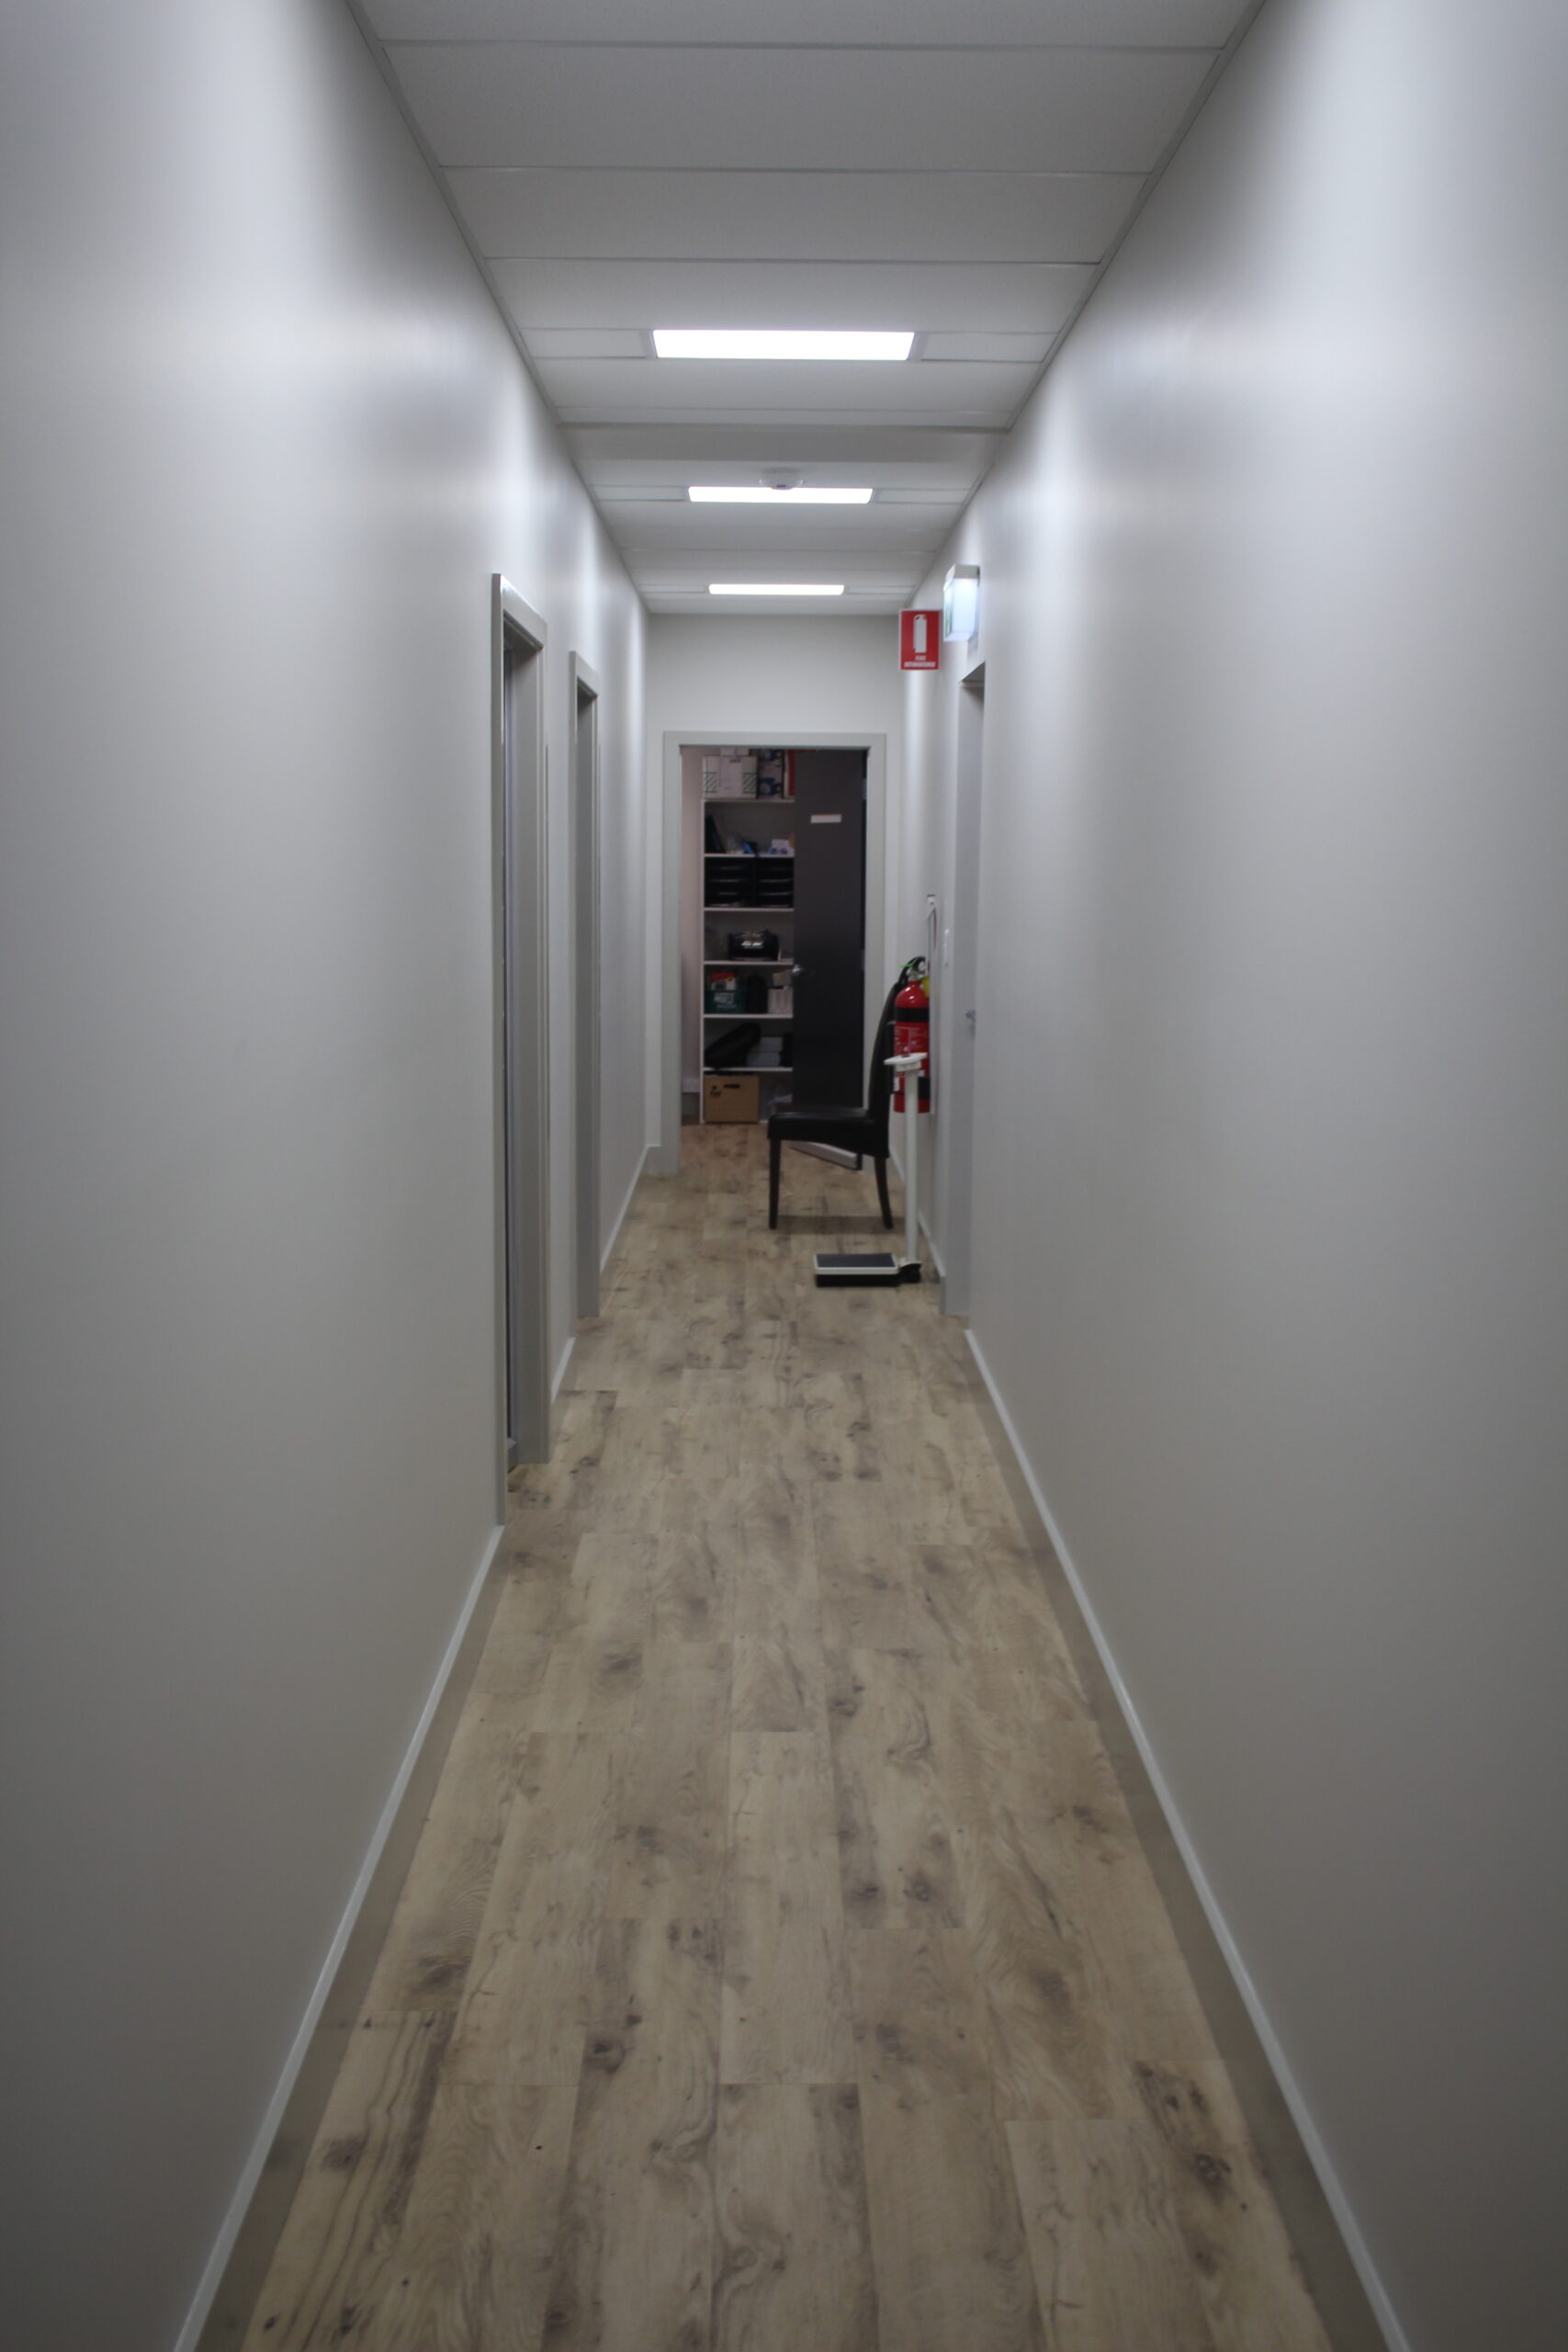 The new hallway leading to the three new consultation rooms.